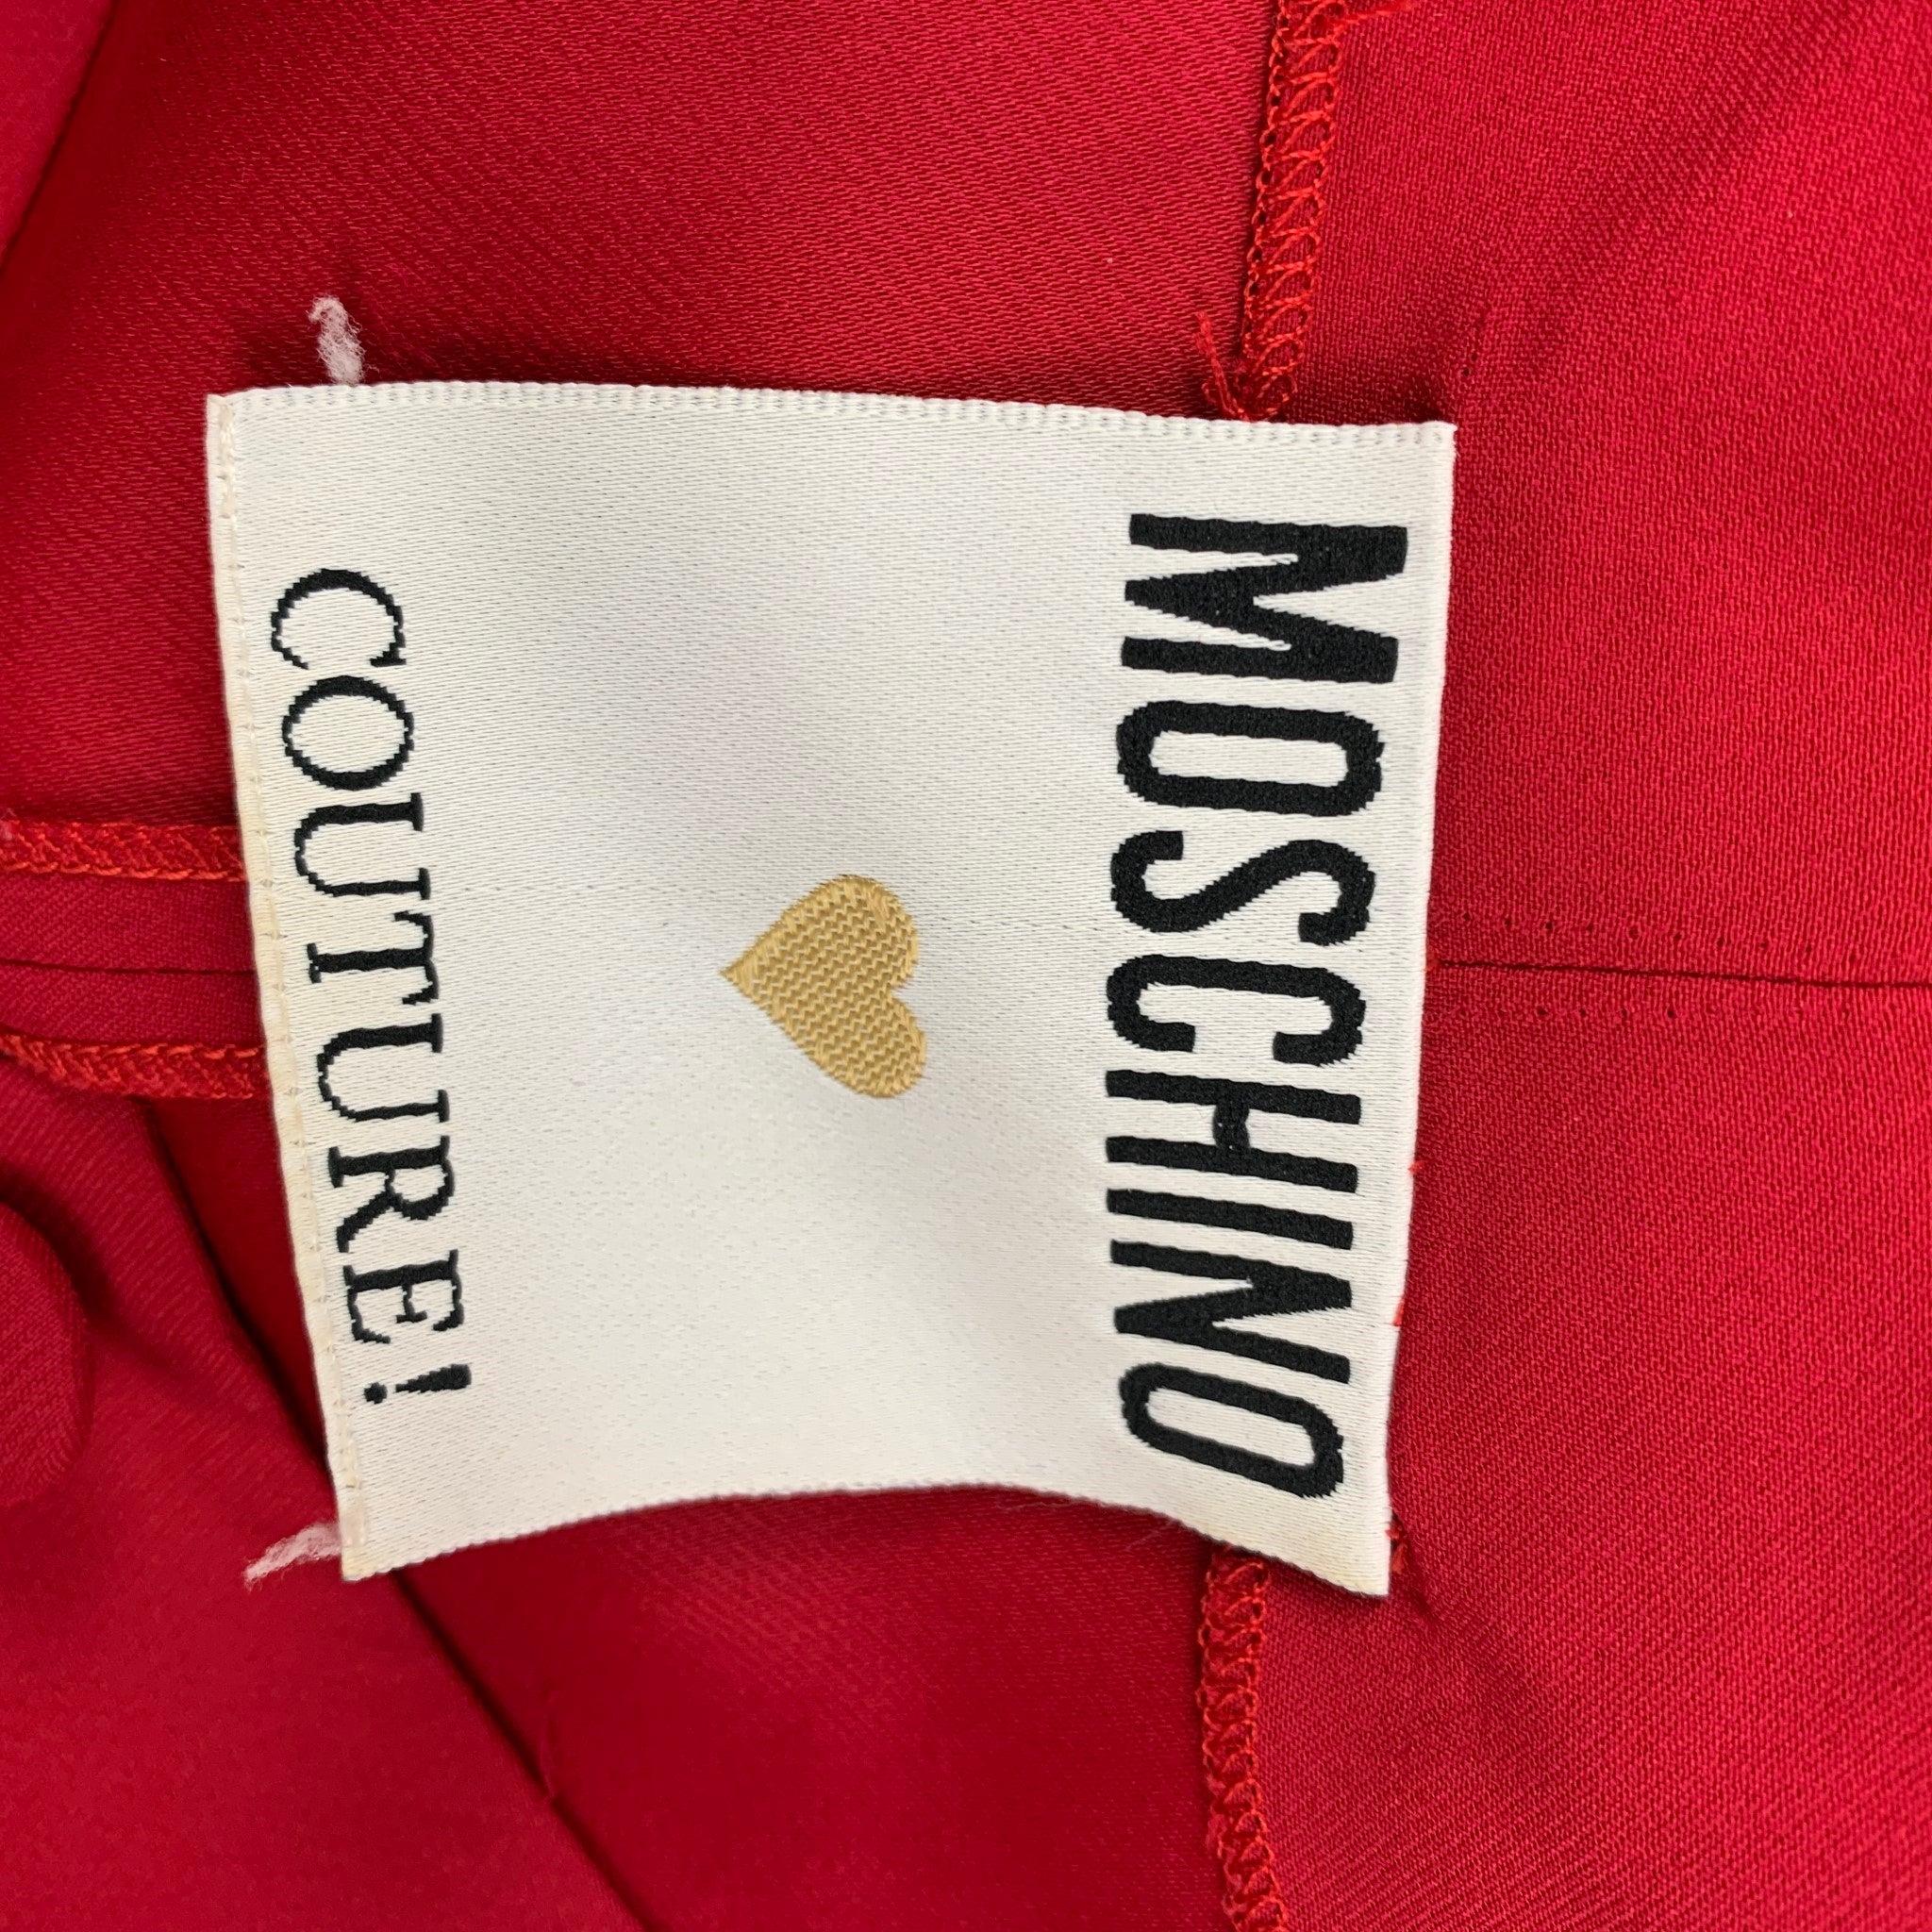 Moschino Couture - Chemisier sans manches en rayonne acétate rouge - Taille 8 en vente 2